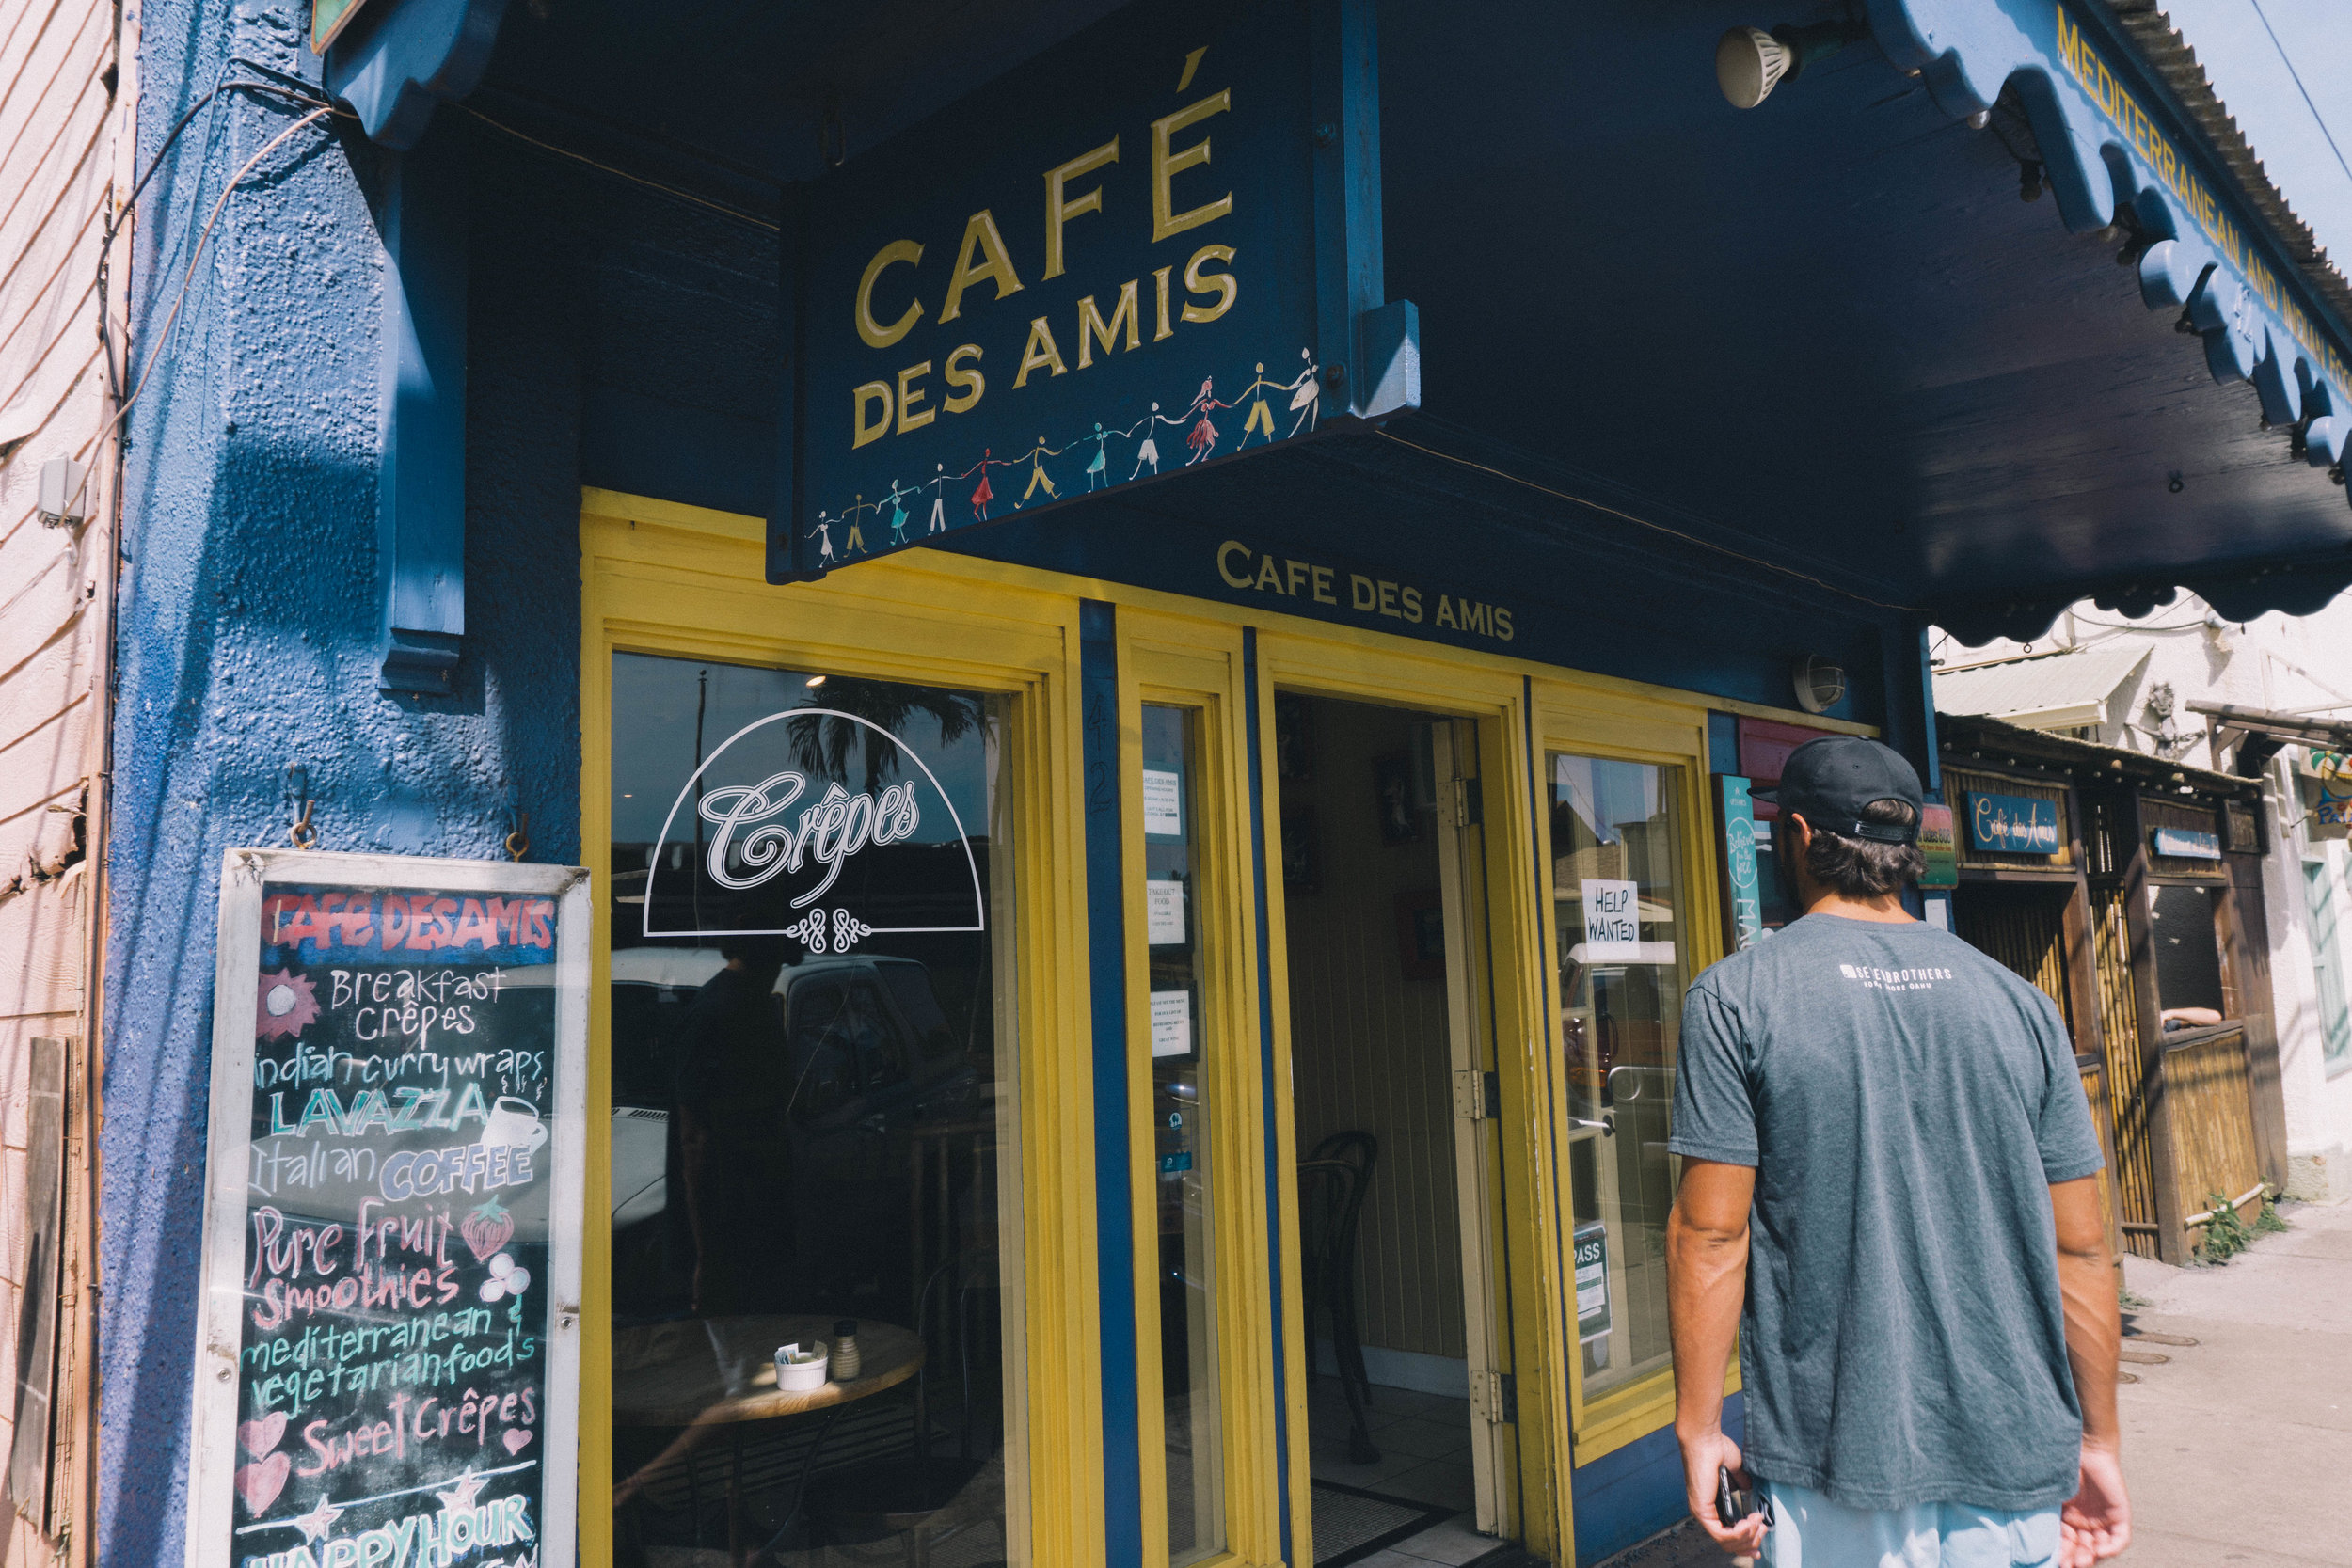  Our local jeep guy suggested  CAFE DE AMIS  in Paia town for breakfast and it did not dissapoint! Everything looked so delish on the menu too. 